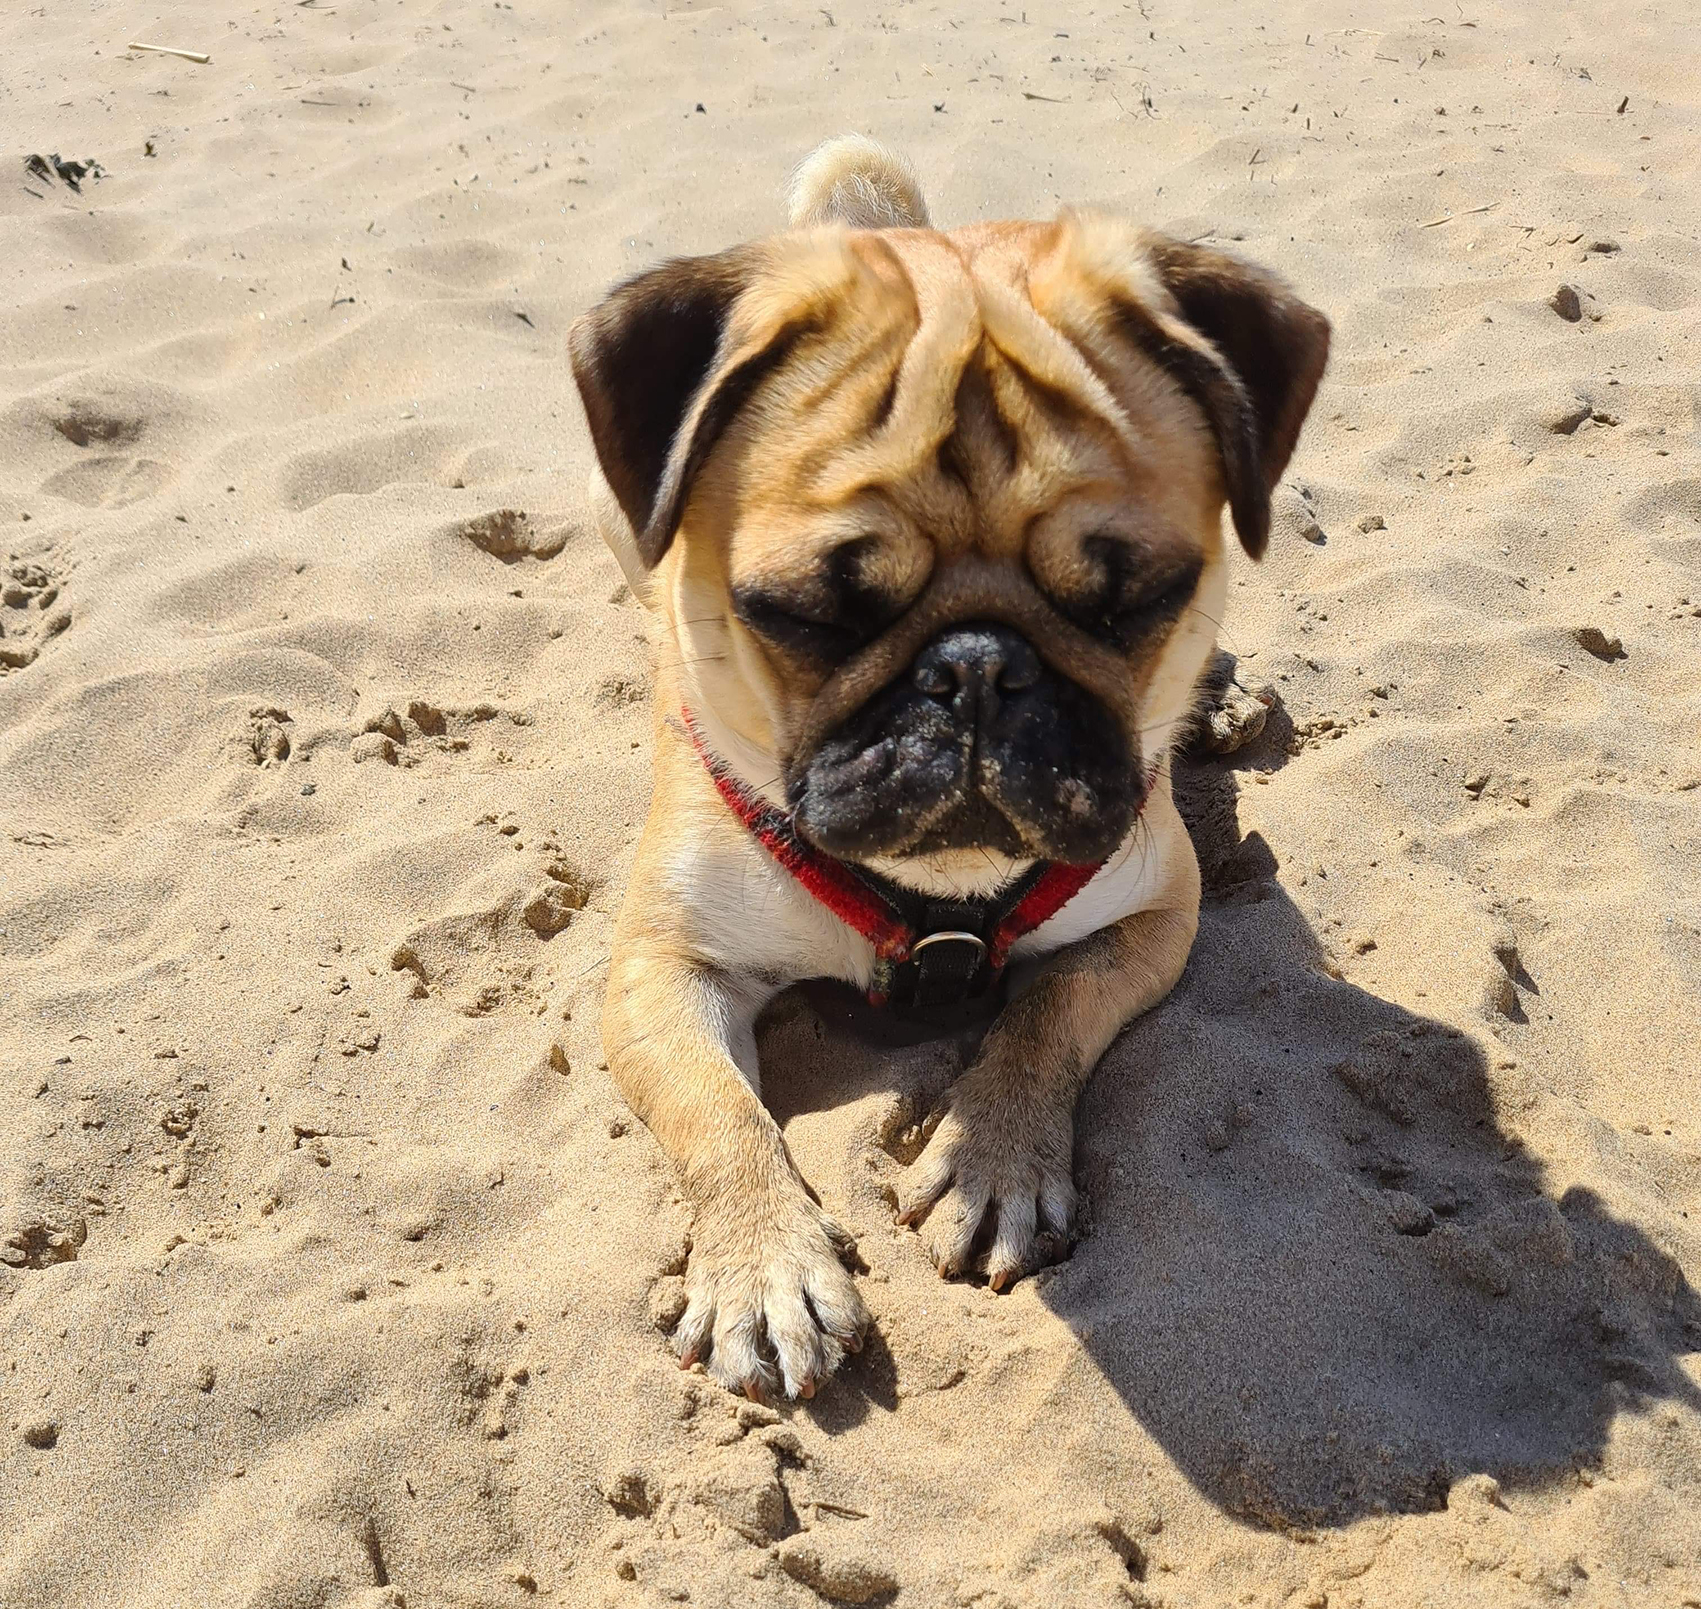 Adoption for Brian - image Beau on https://pugprotectiontrust.org